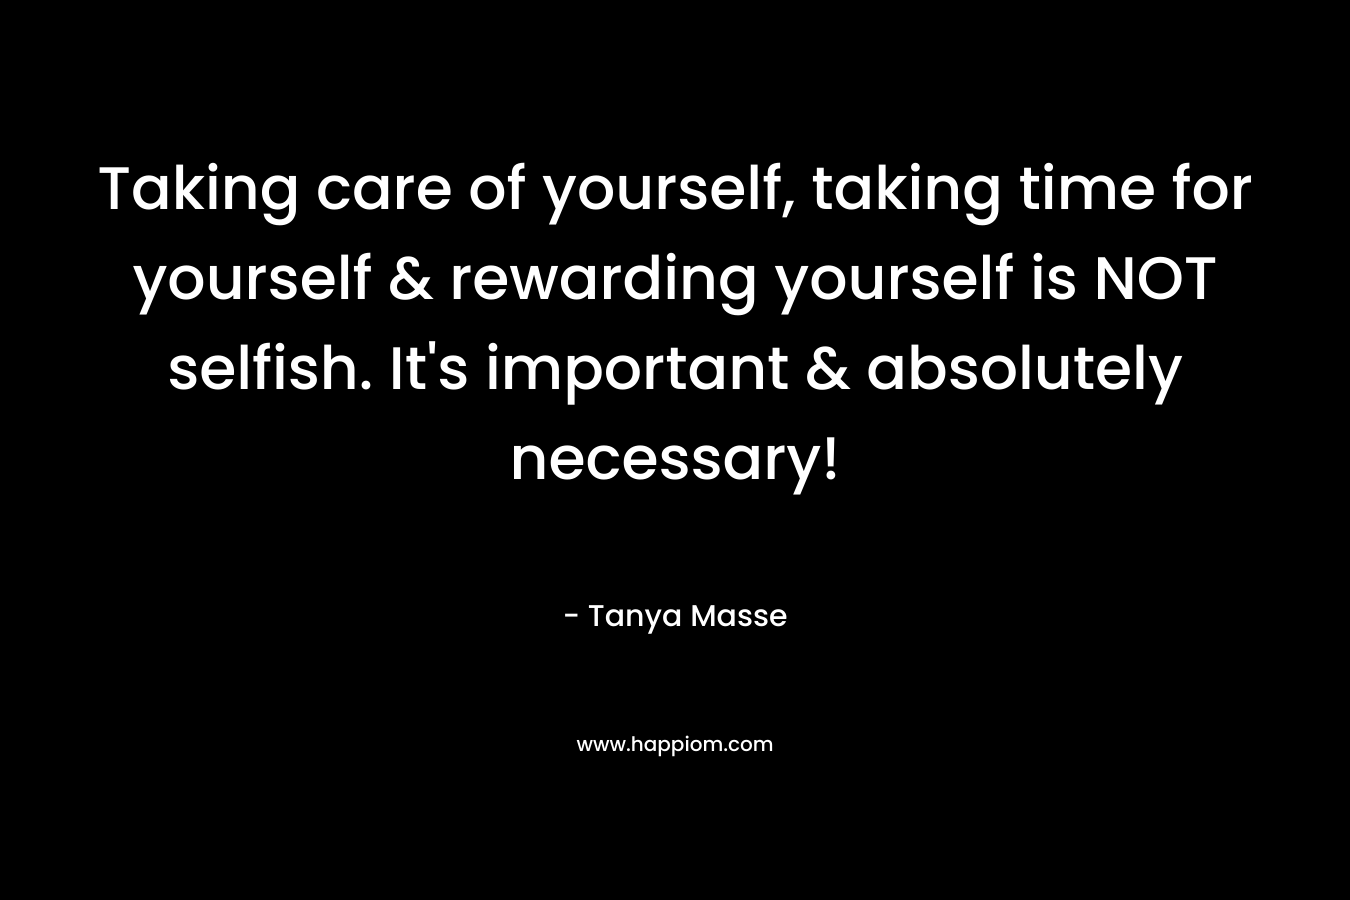 Taking care of yourself, taking time for yourself & rewarding yourself is NOT selfish. It’s important & absolutely necessary! – Tanya Masse